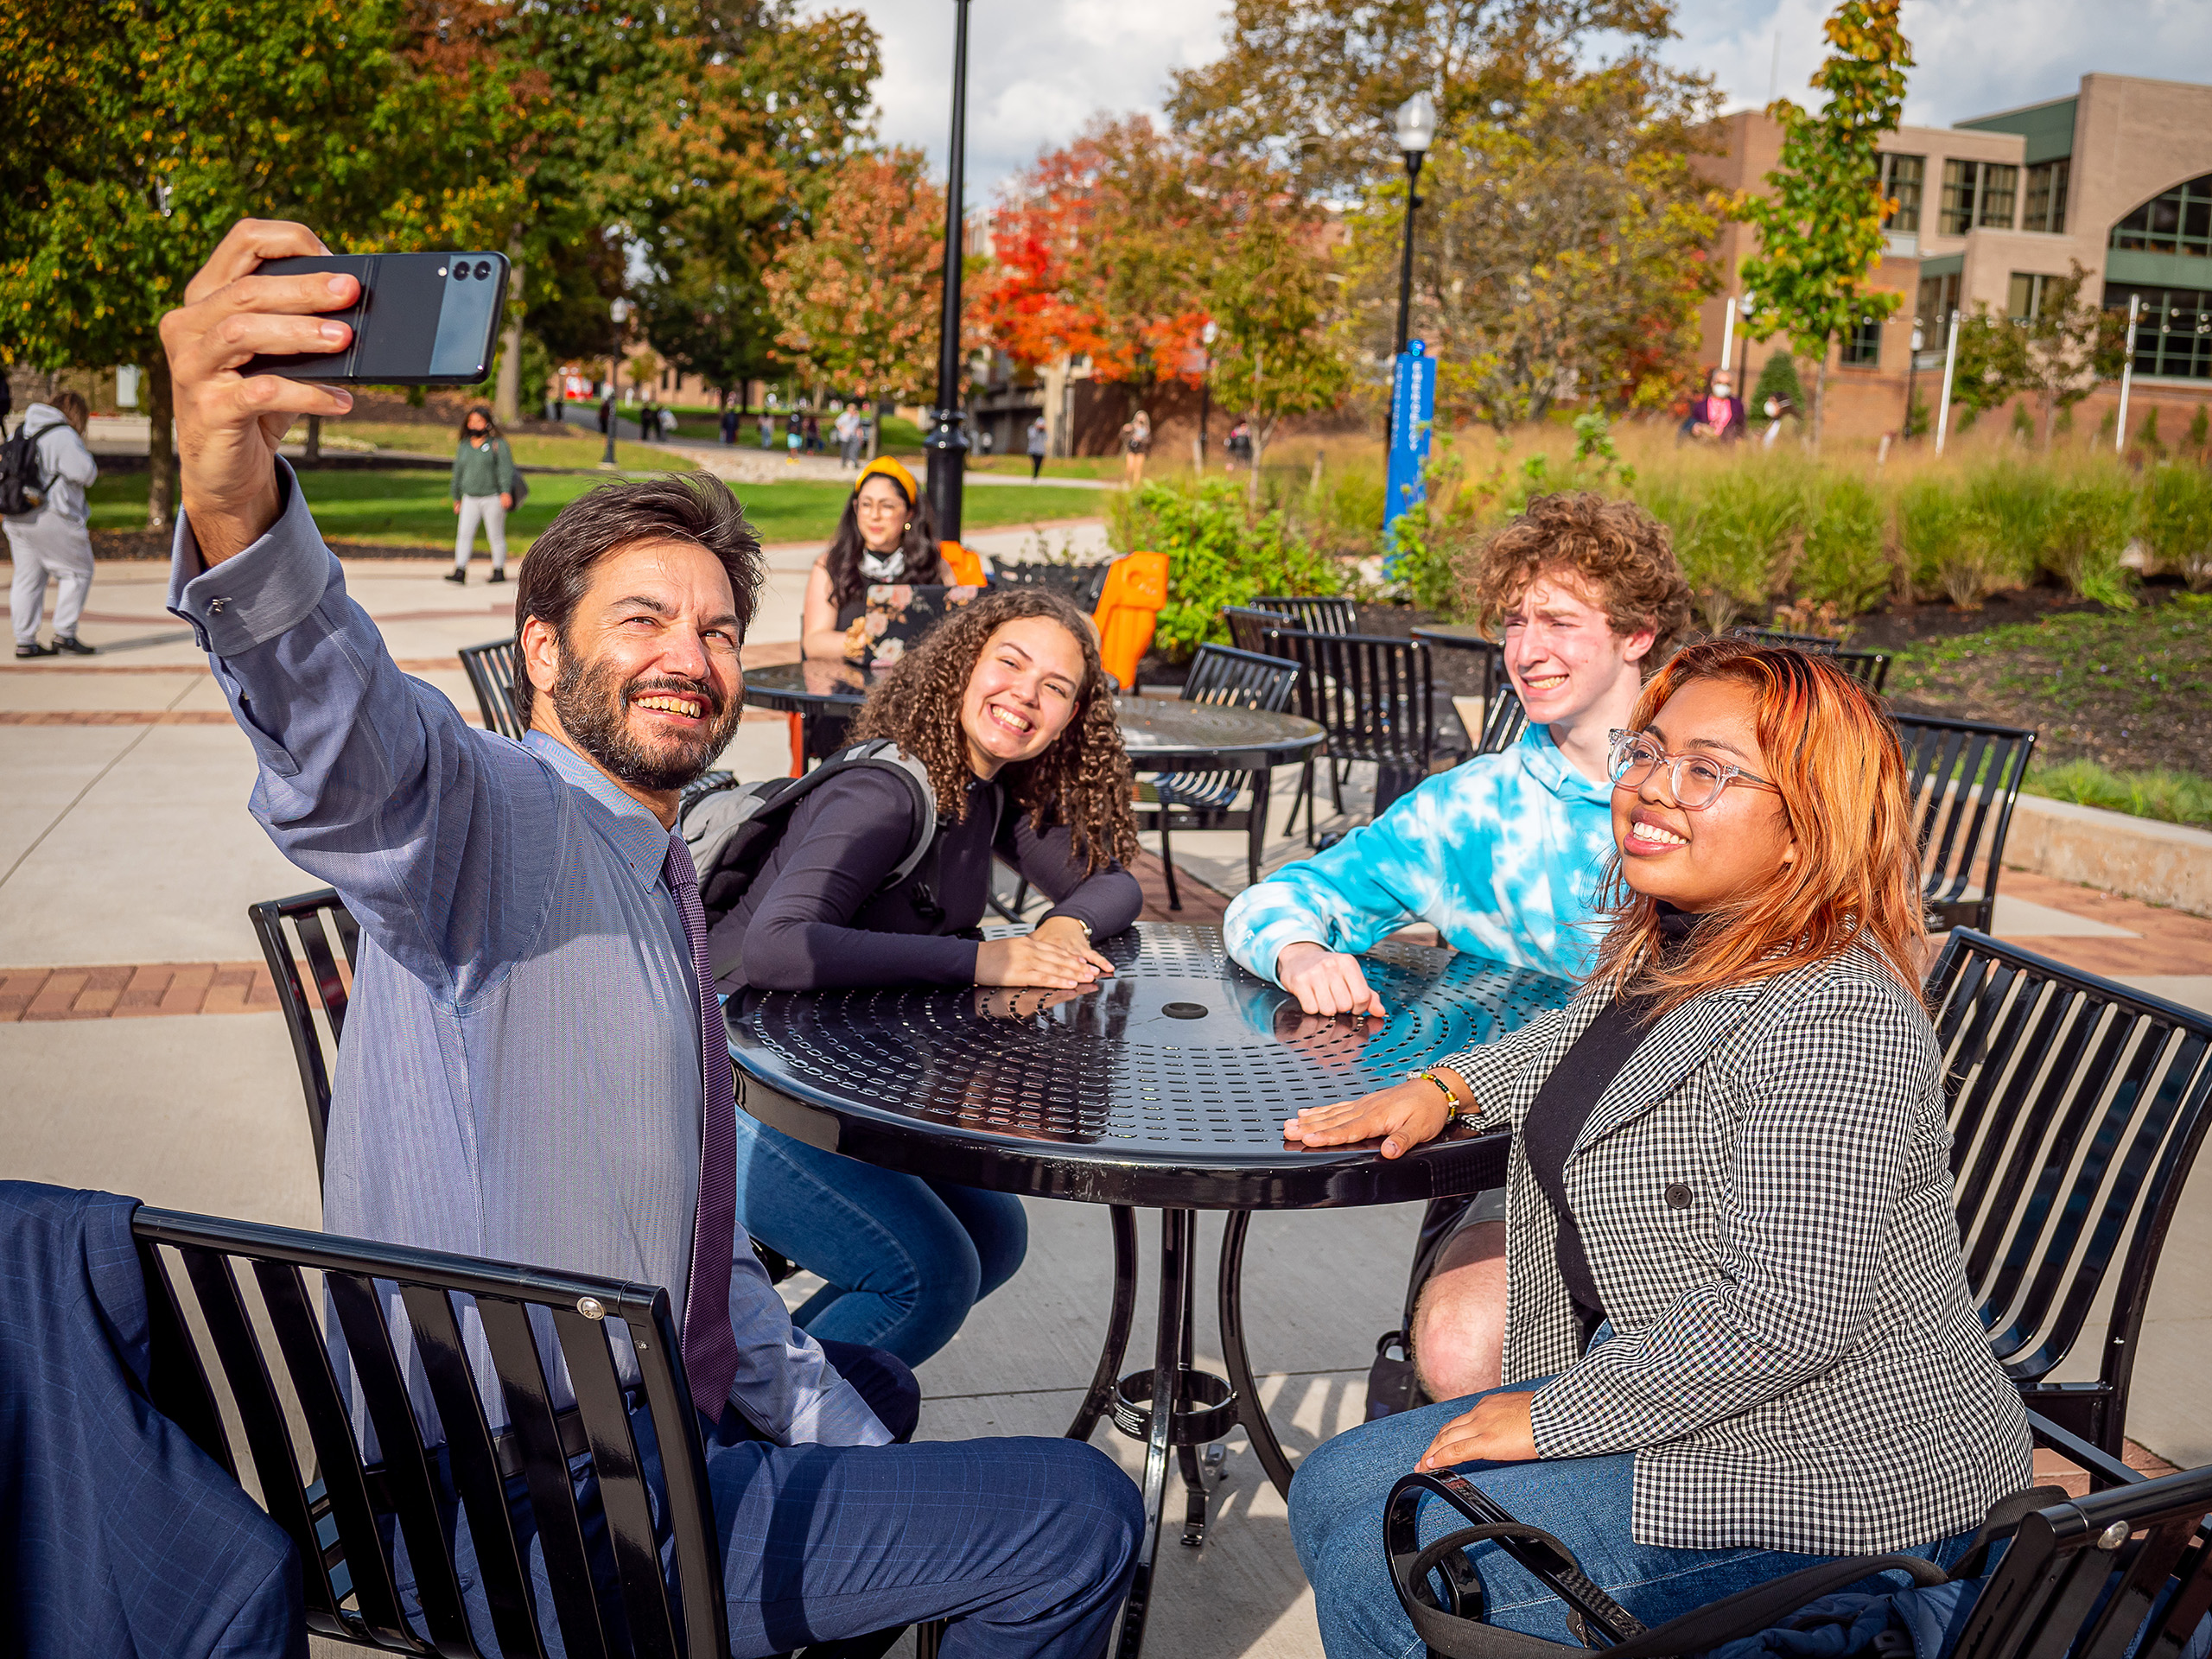 President Koppell taking a selfie with students on campus